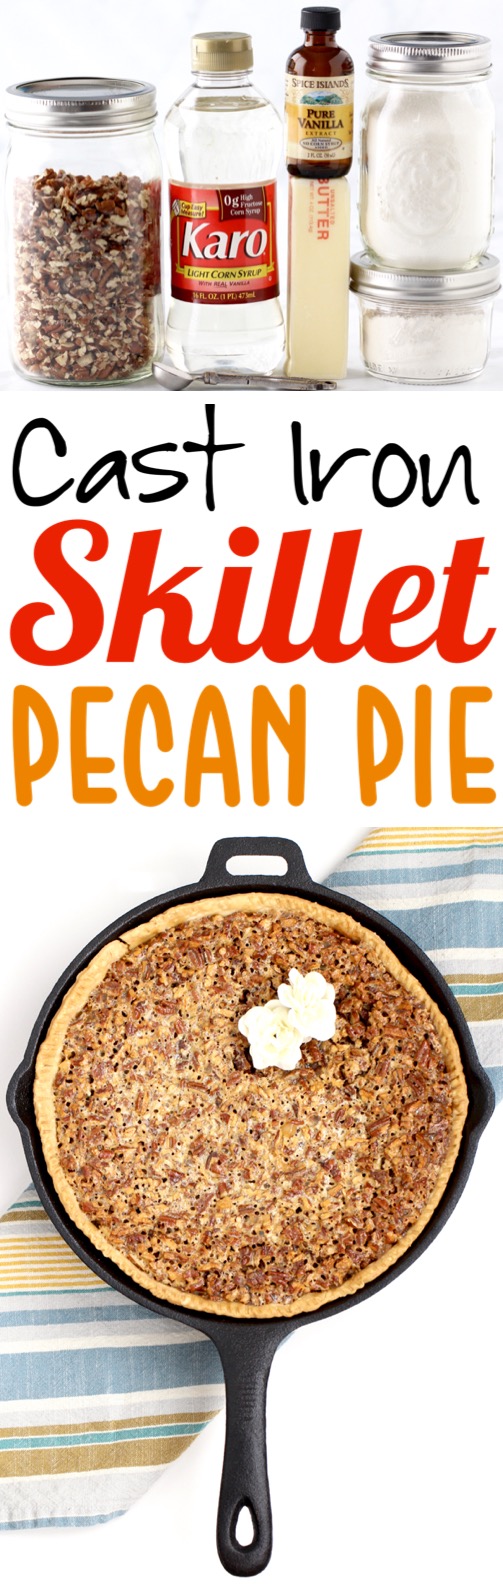 Pecan Pie Recipe | This Easy Southern Cast Iron Skillet Pecan Pie with Corn Syrup is simply the Best... simple to make and SO delicious